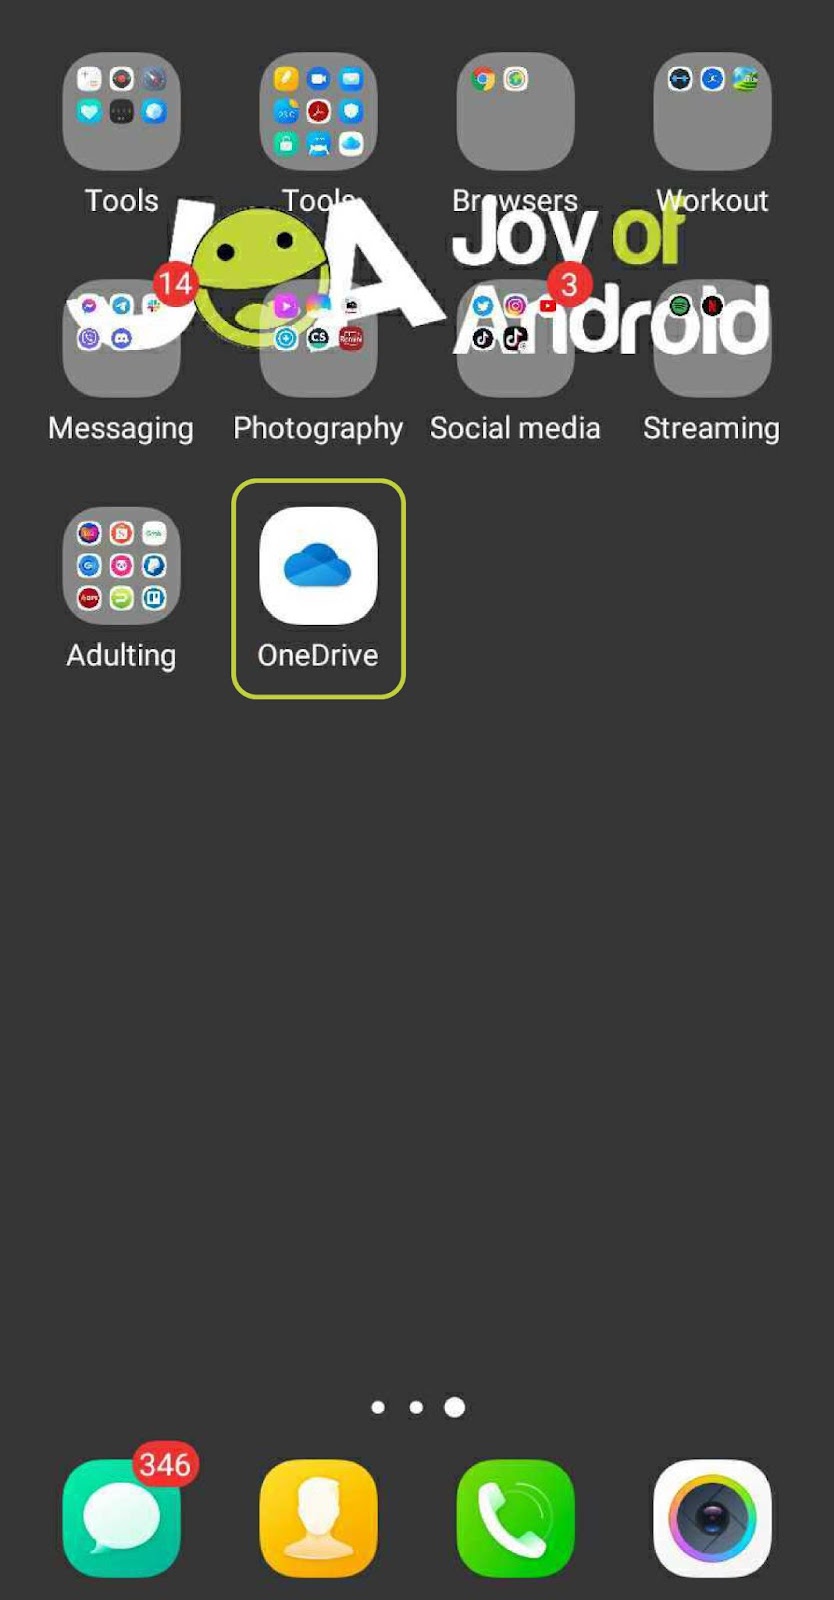 Tap on OneDrive to launch it.